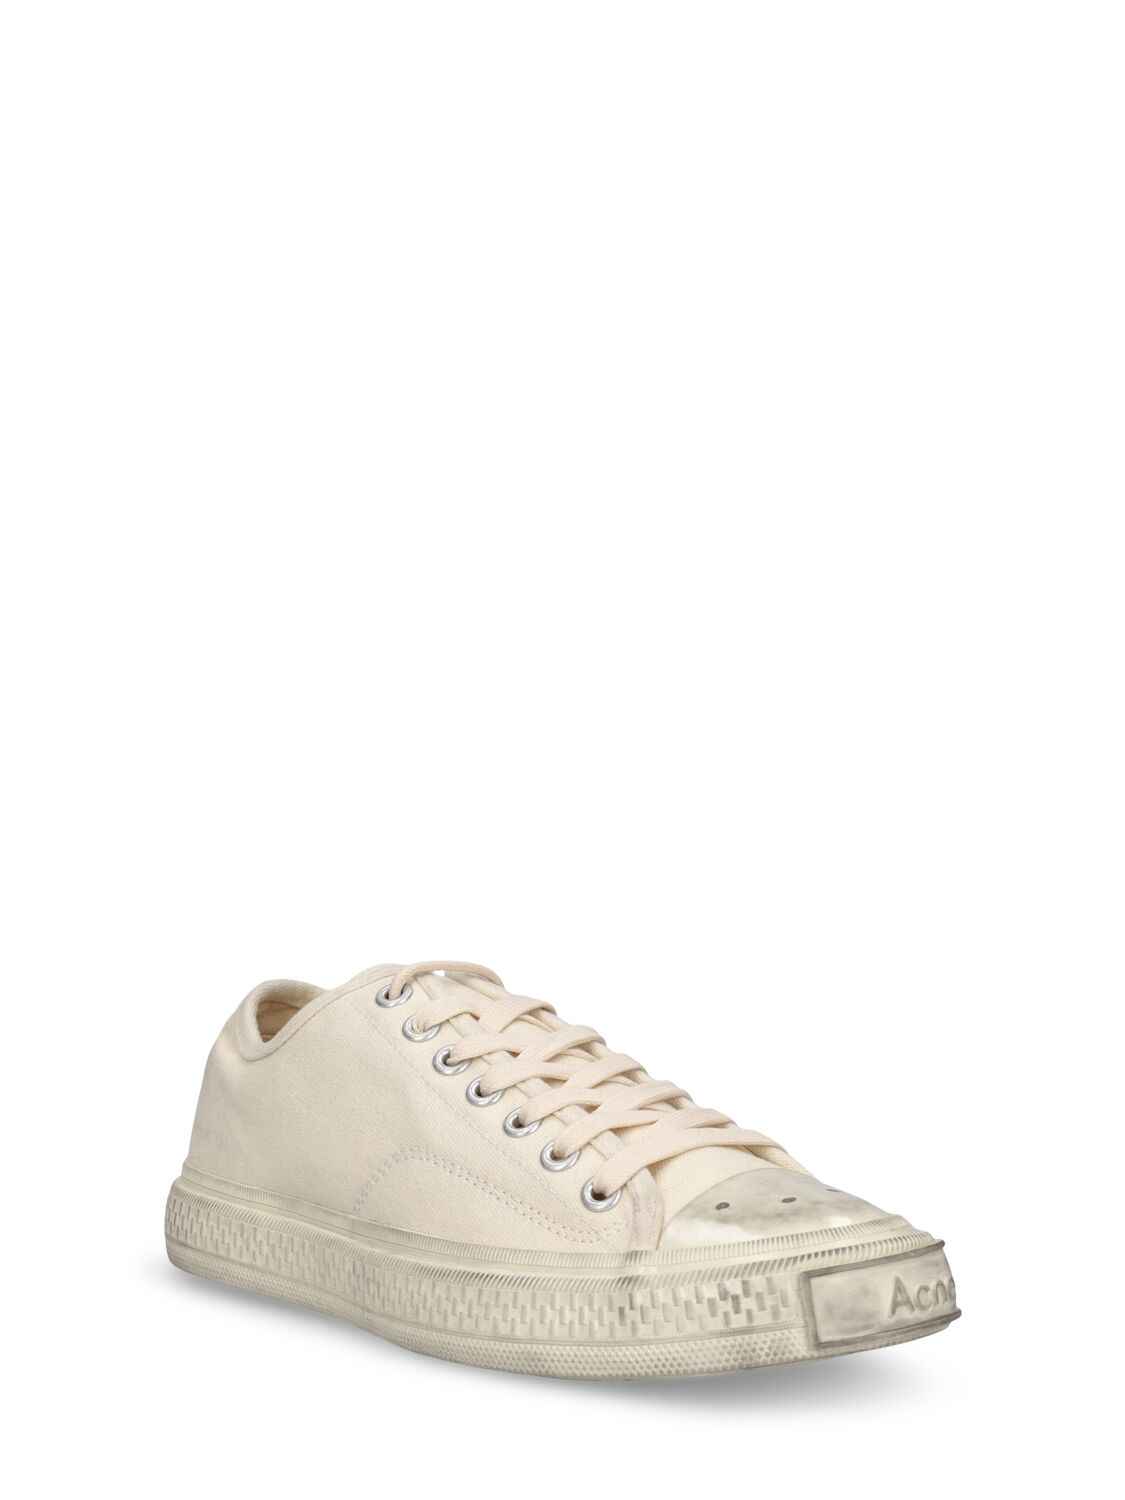 Shop Acne Studios Ballow Cotton Low Top Sneakers In Off White